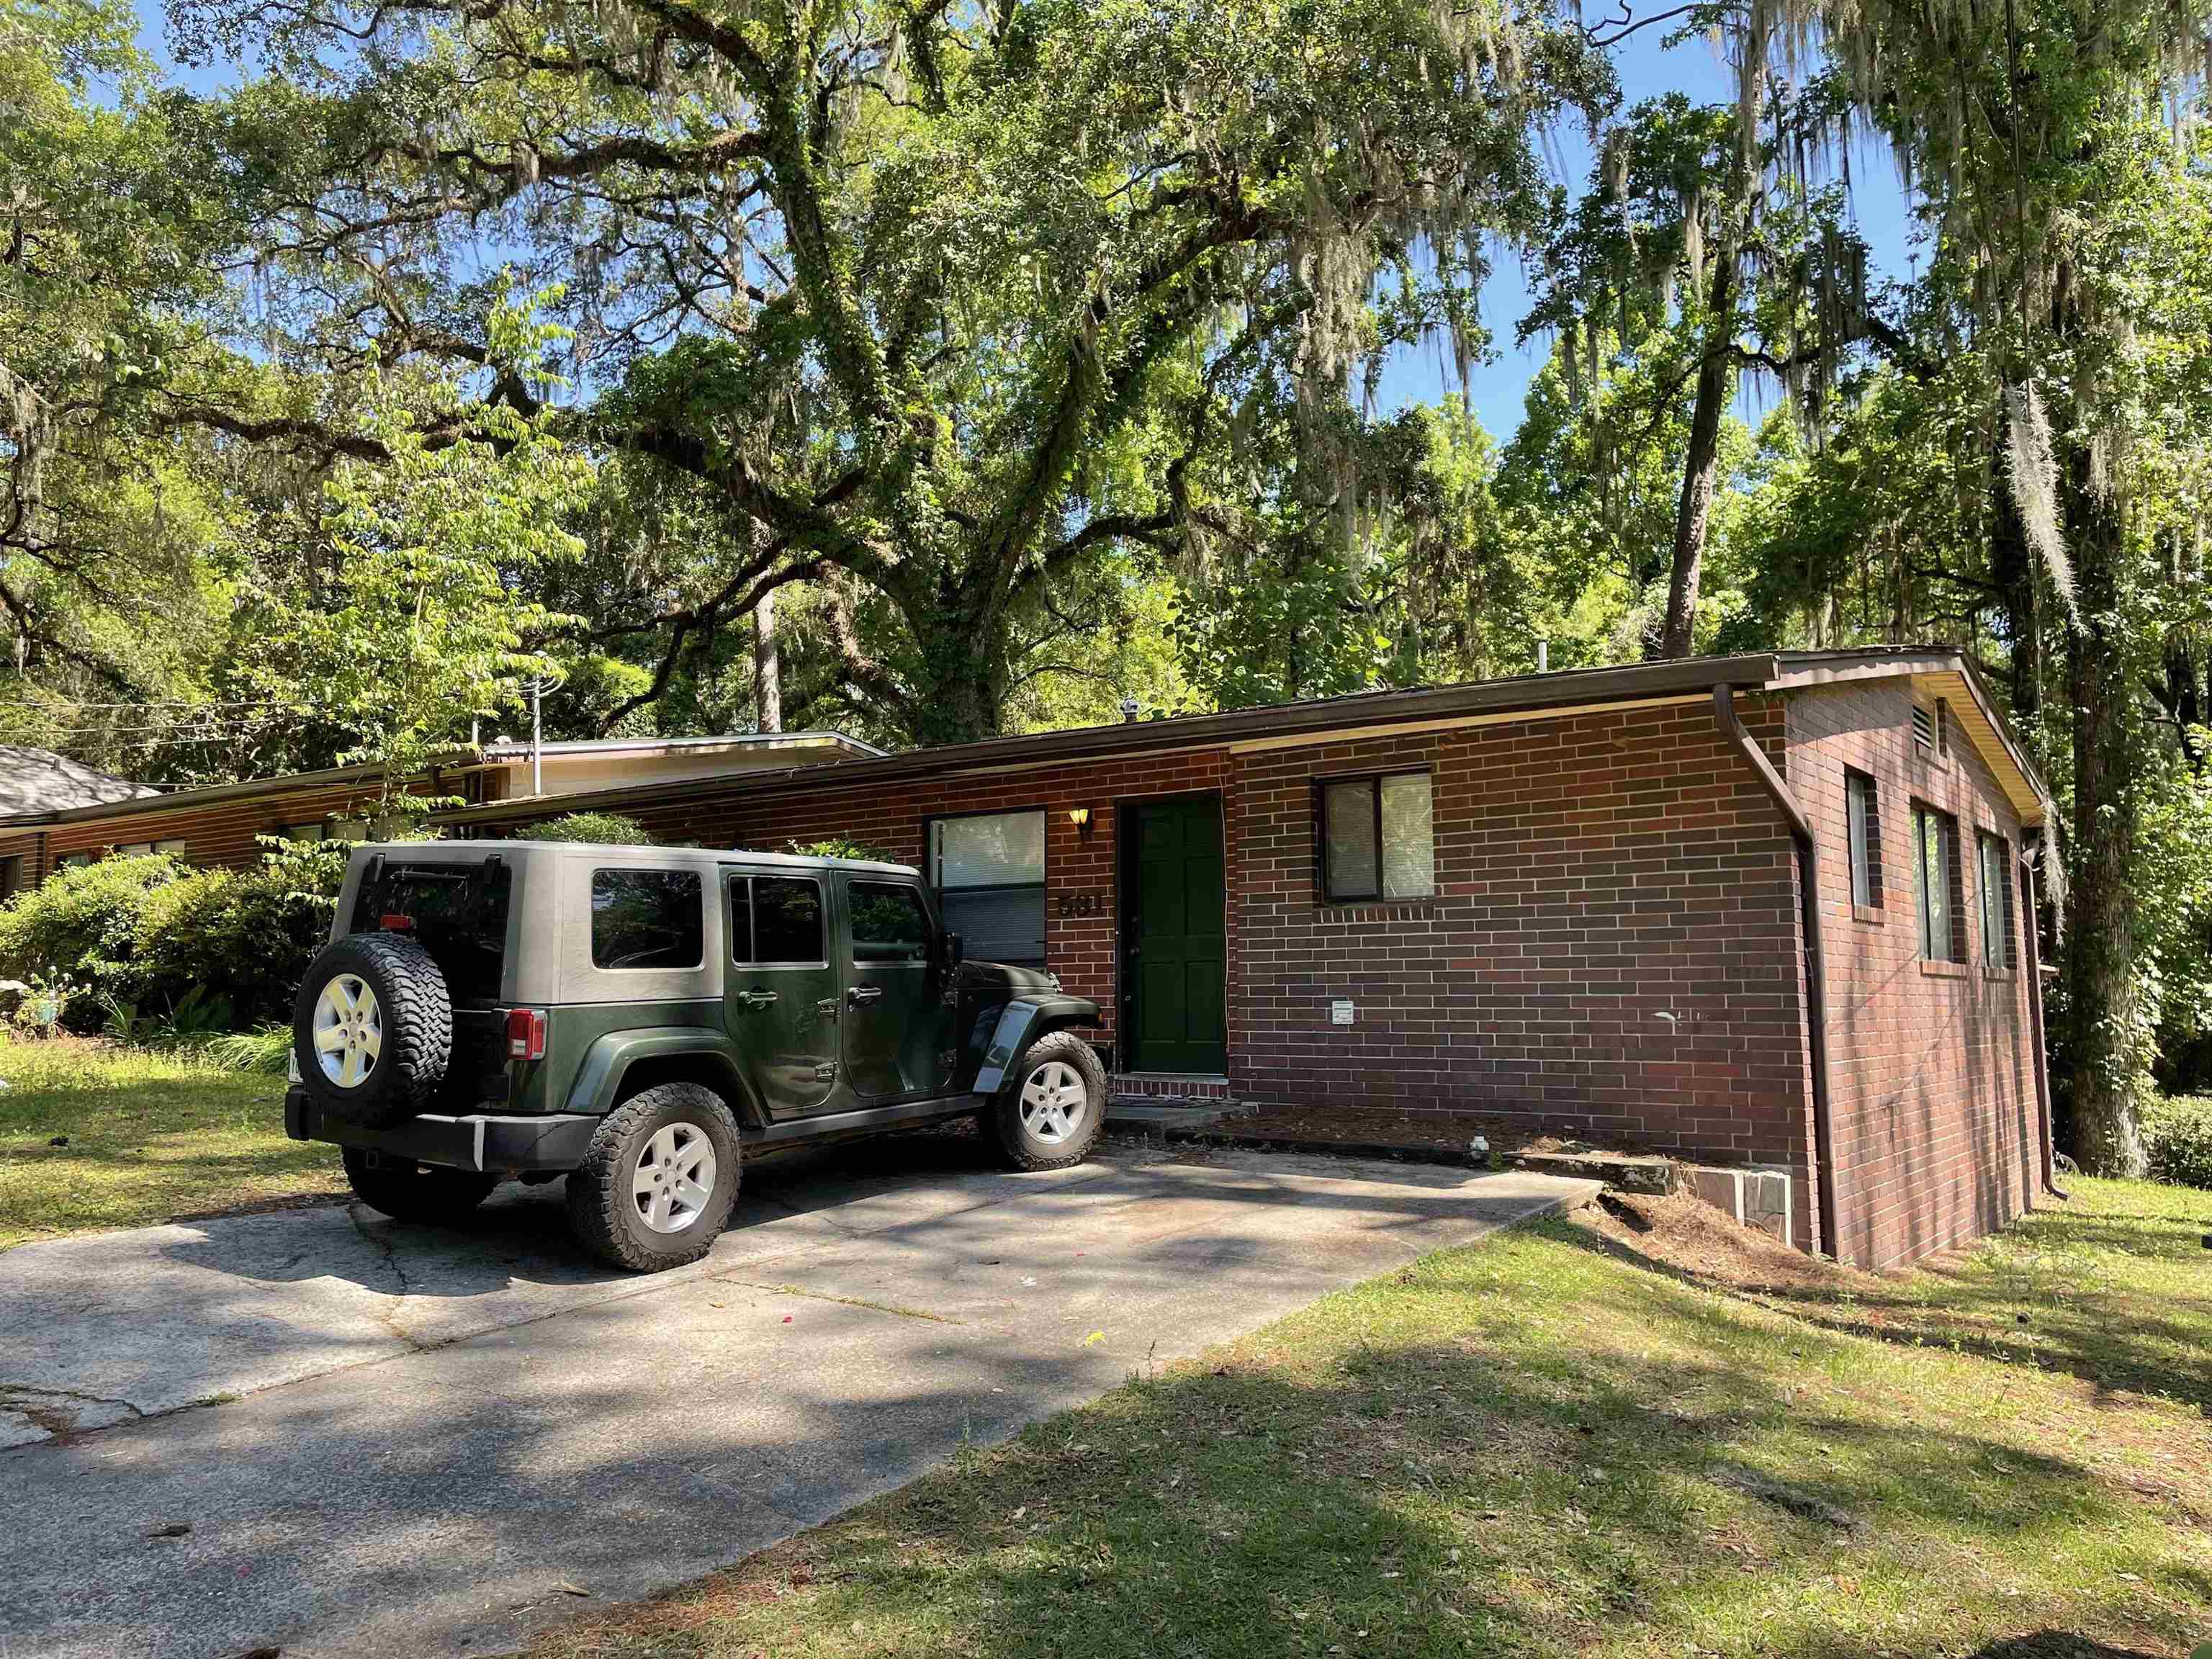 Calling all investors! Over $43k Potential Gross Rent Income! All brick duplex with a separate tiny home in the back, in PRIME Myers Park! Walk to Cascades Park and downtown within minutes. Close to FSU, FAMU, Greenwise, Gaines street shops, and more..... Each unit of the duplex is 3 bedroom/2 bathroom, while the adorable tiny home sits in the back. Super well maintained and has been cared for under property management. New Roof 2022. New HVAC 2022, for one of the units. Adjoining parcel with similar duplex, as well as an apartment underneath rather than a tiny home in the back, is also listed for sale. Don't miss this opportunity to have a prime investment location in the heart of Tallahassee. Bring your offers! All measurements are approximate and should be independently reviewed and verified for accuracy.